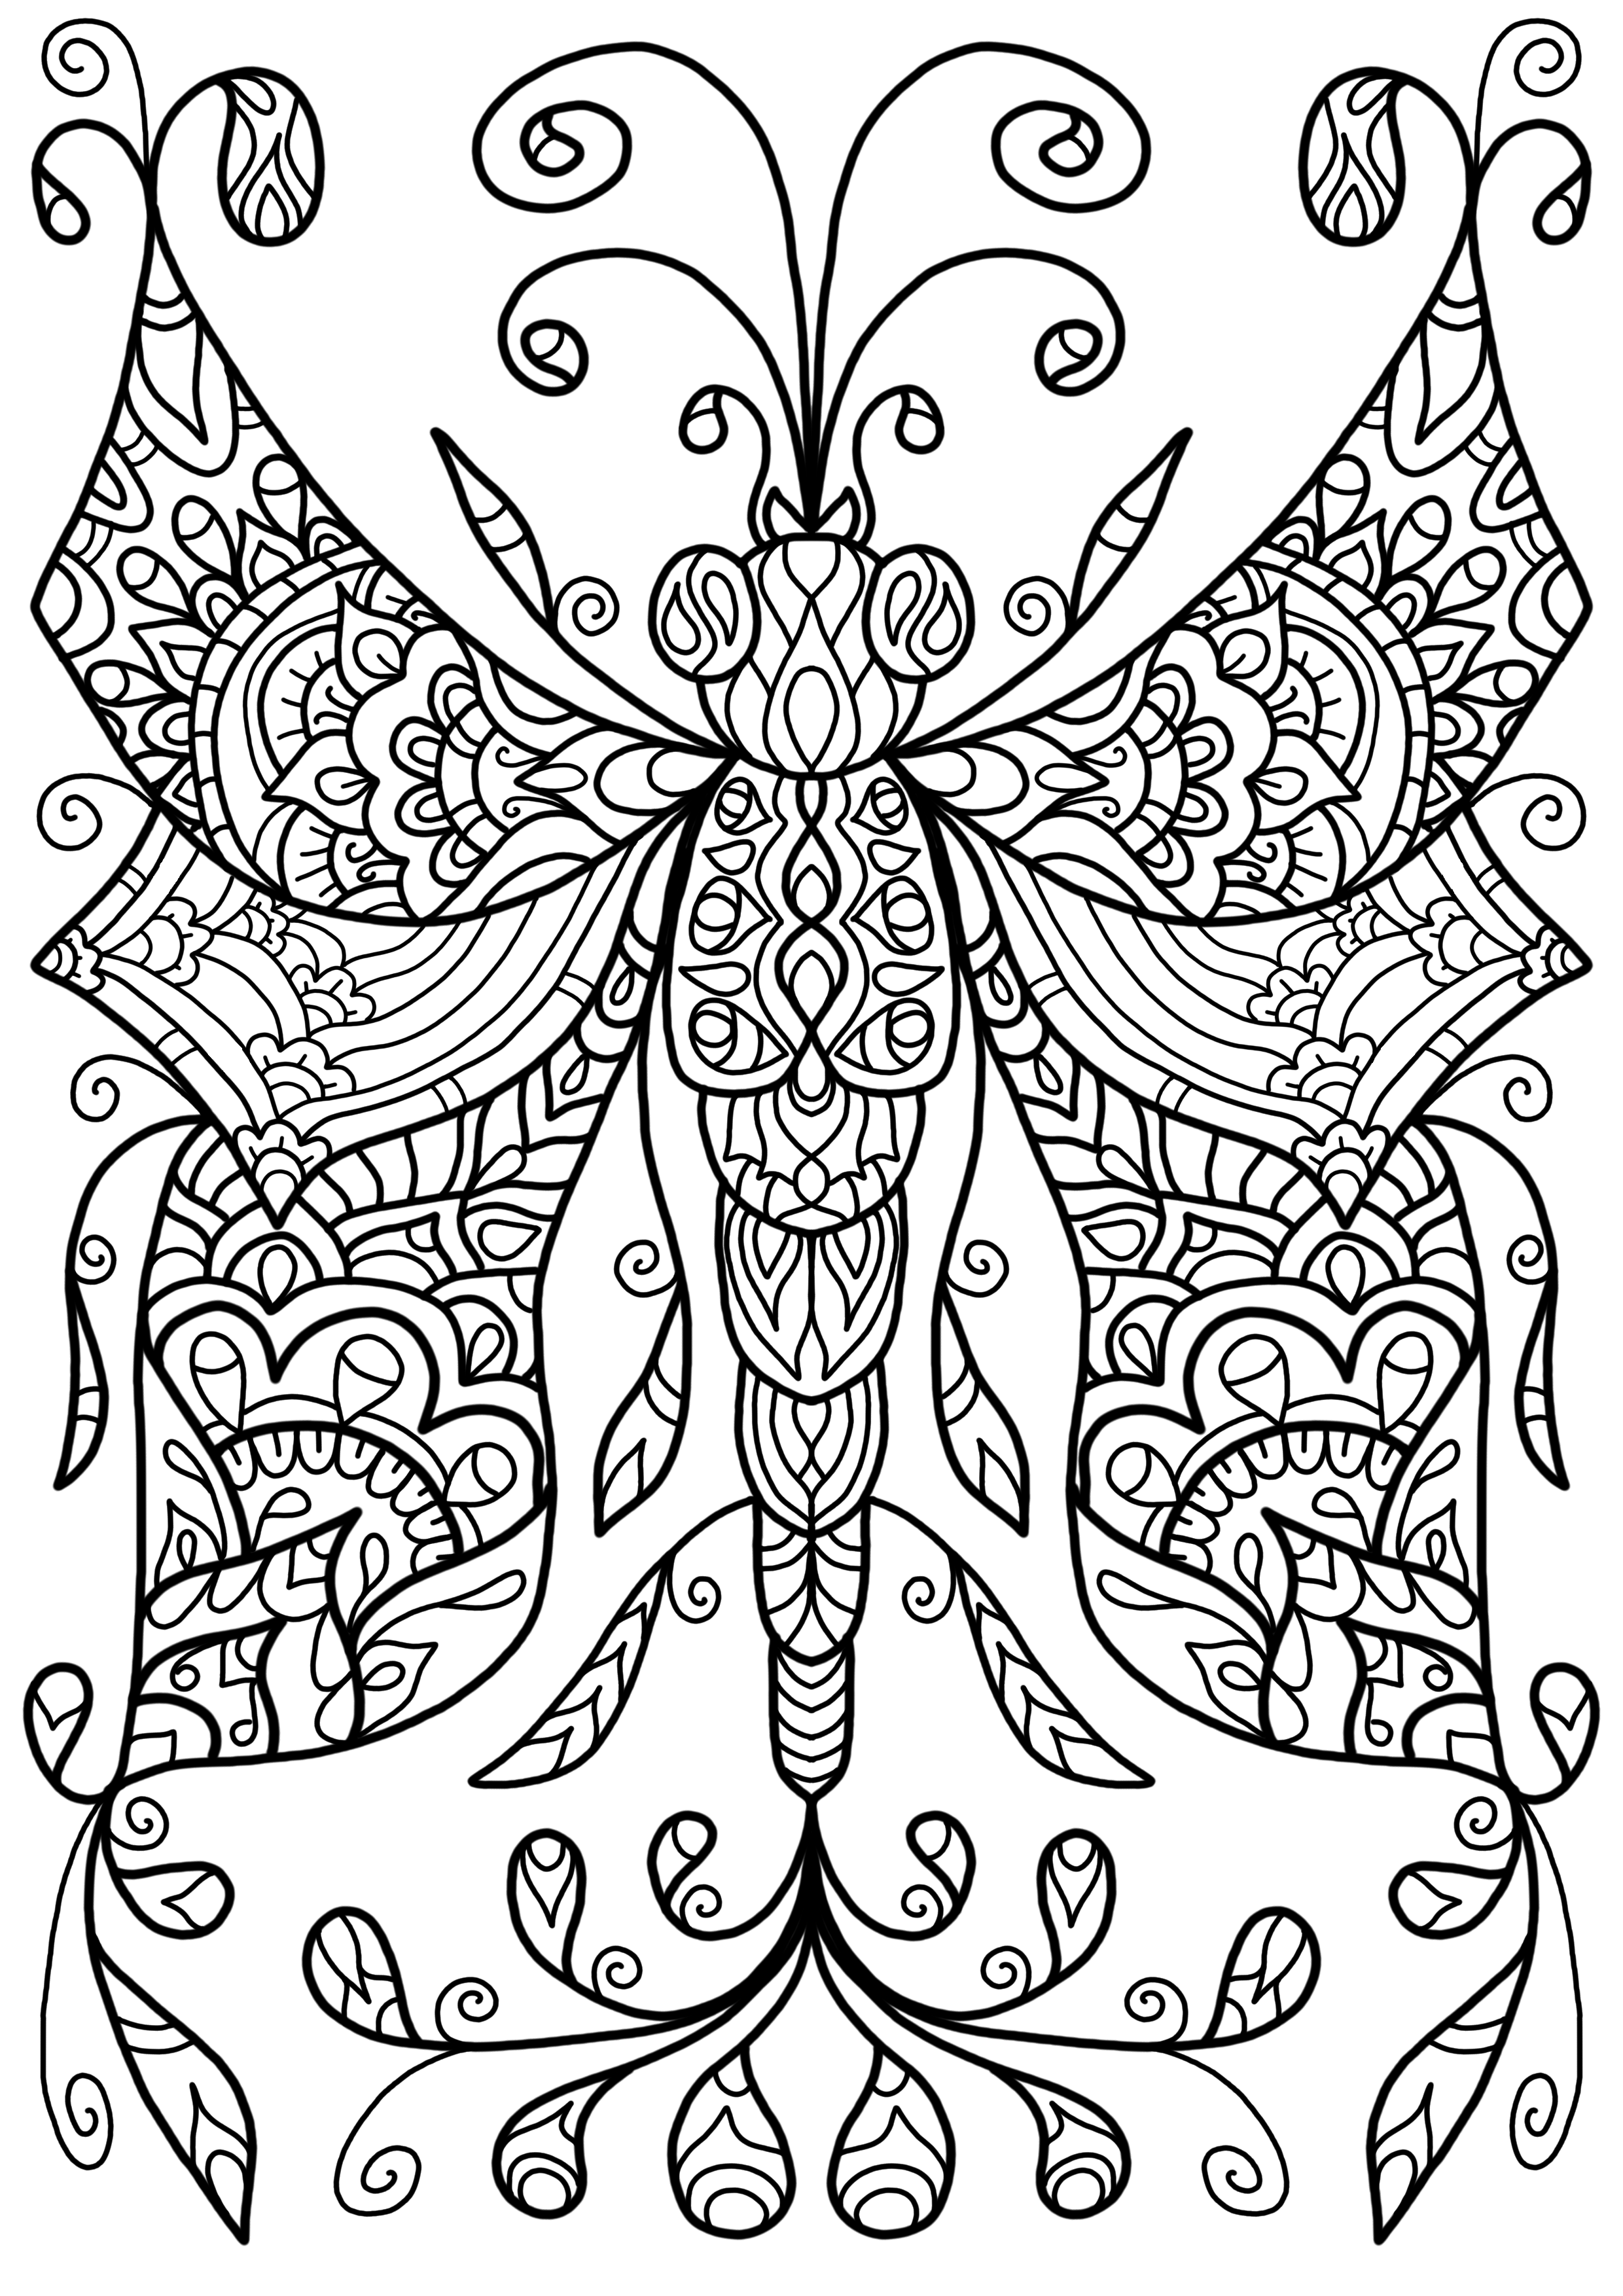 Free Colouring Page - Dragonfly Thing by WelshPixie on ...